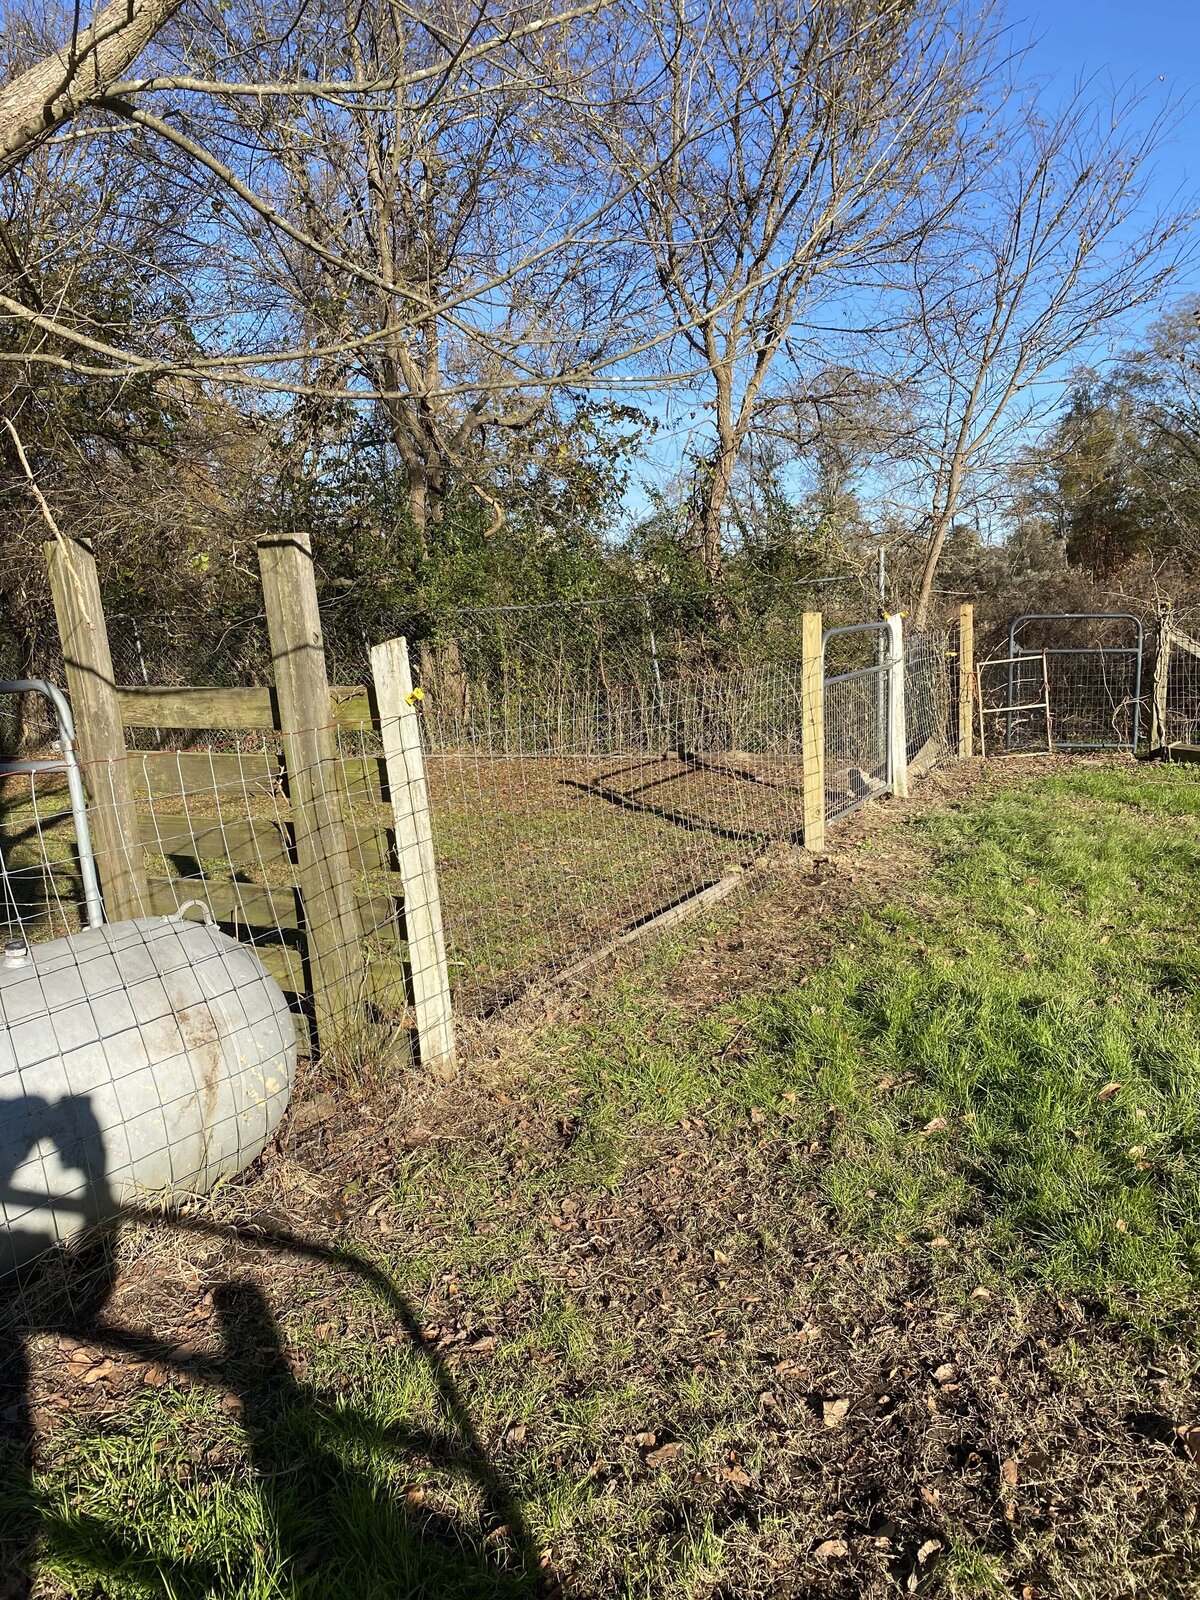 wood-and-wire-fence-among-septic-tank-and-trees